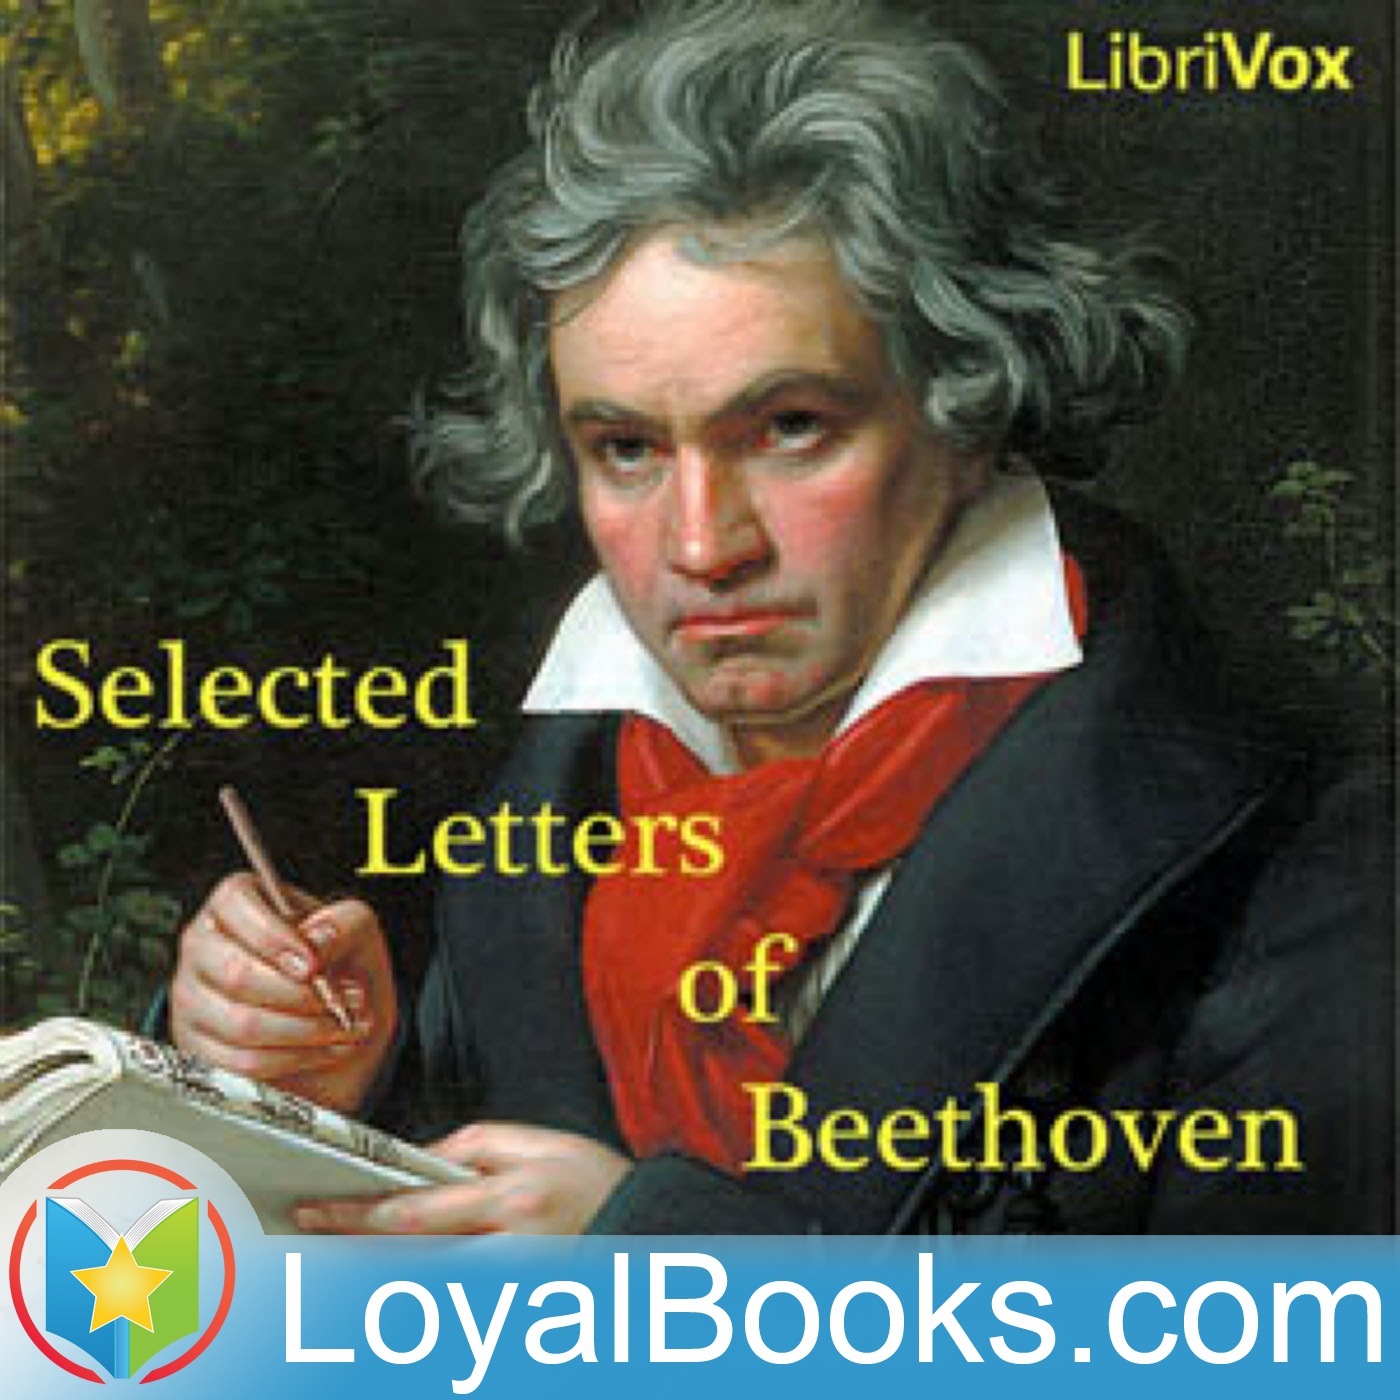 Selected Letters of Beethoven by Ludwig van Beethoven